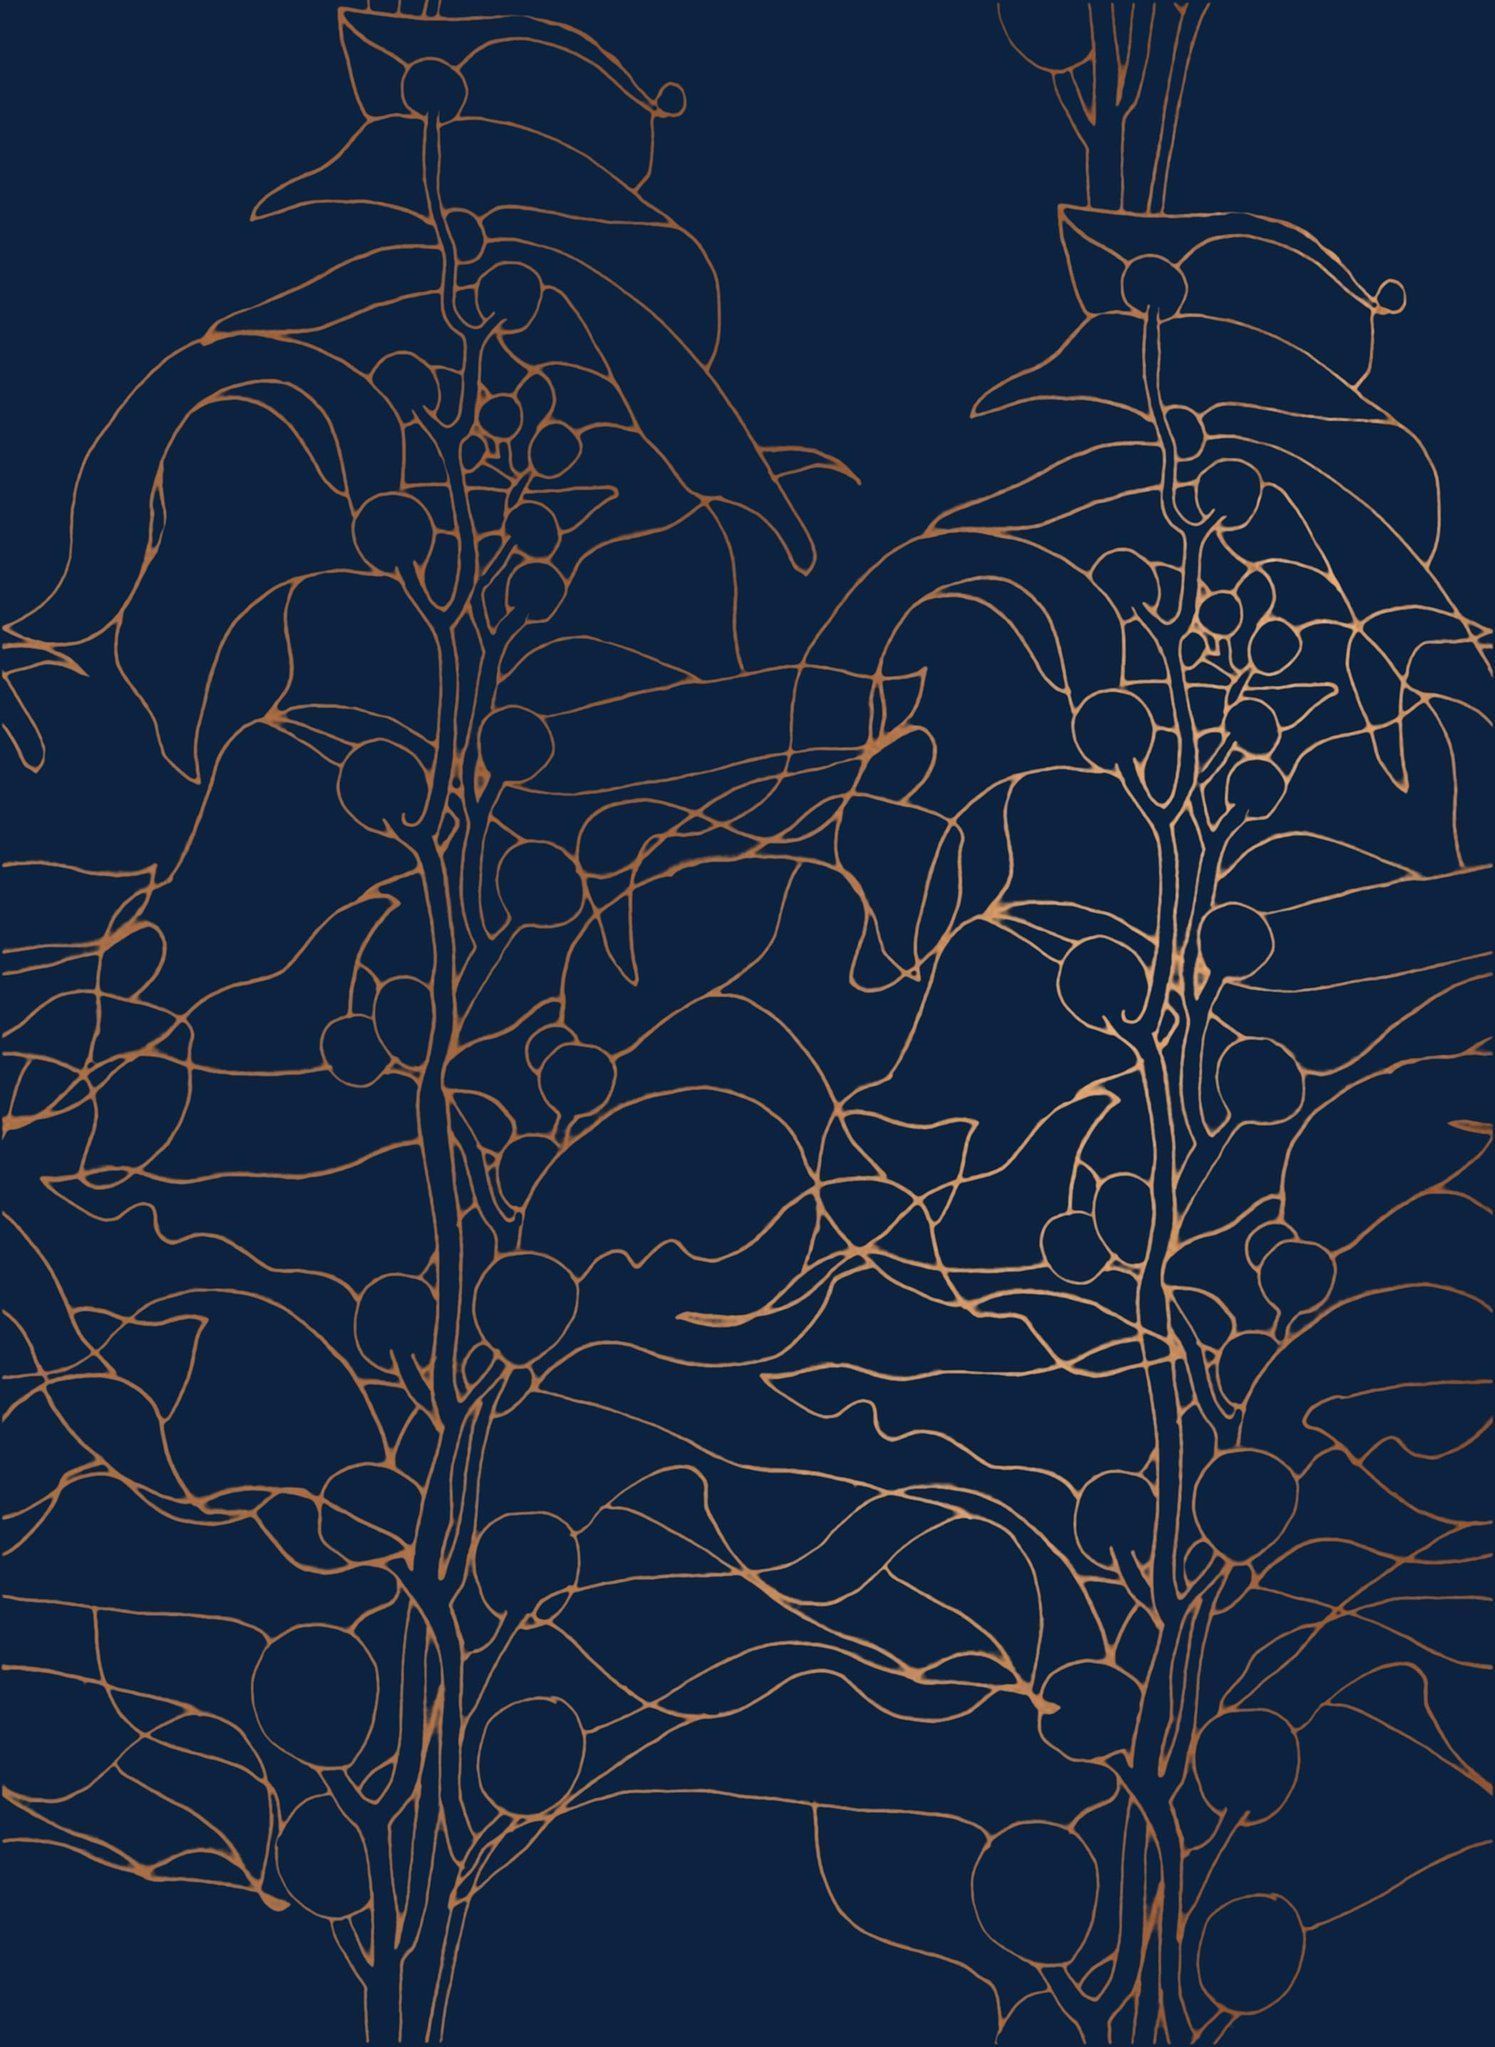 An illustrated design of two coffee plants on a dark blue background - Indigo